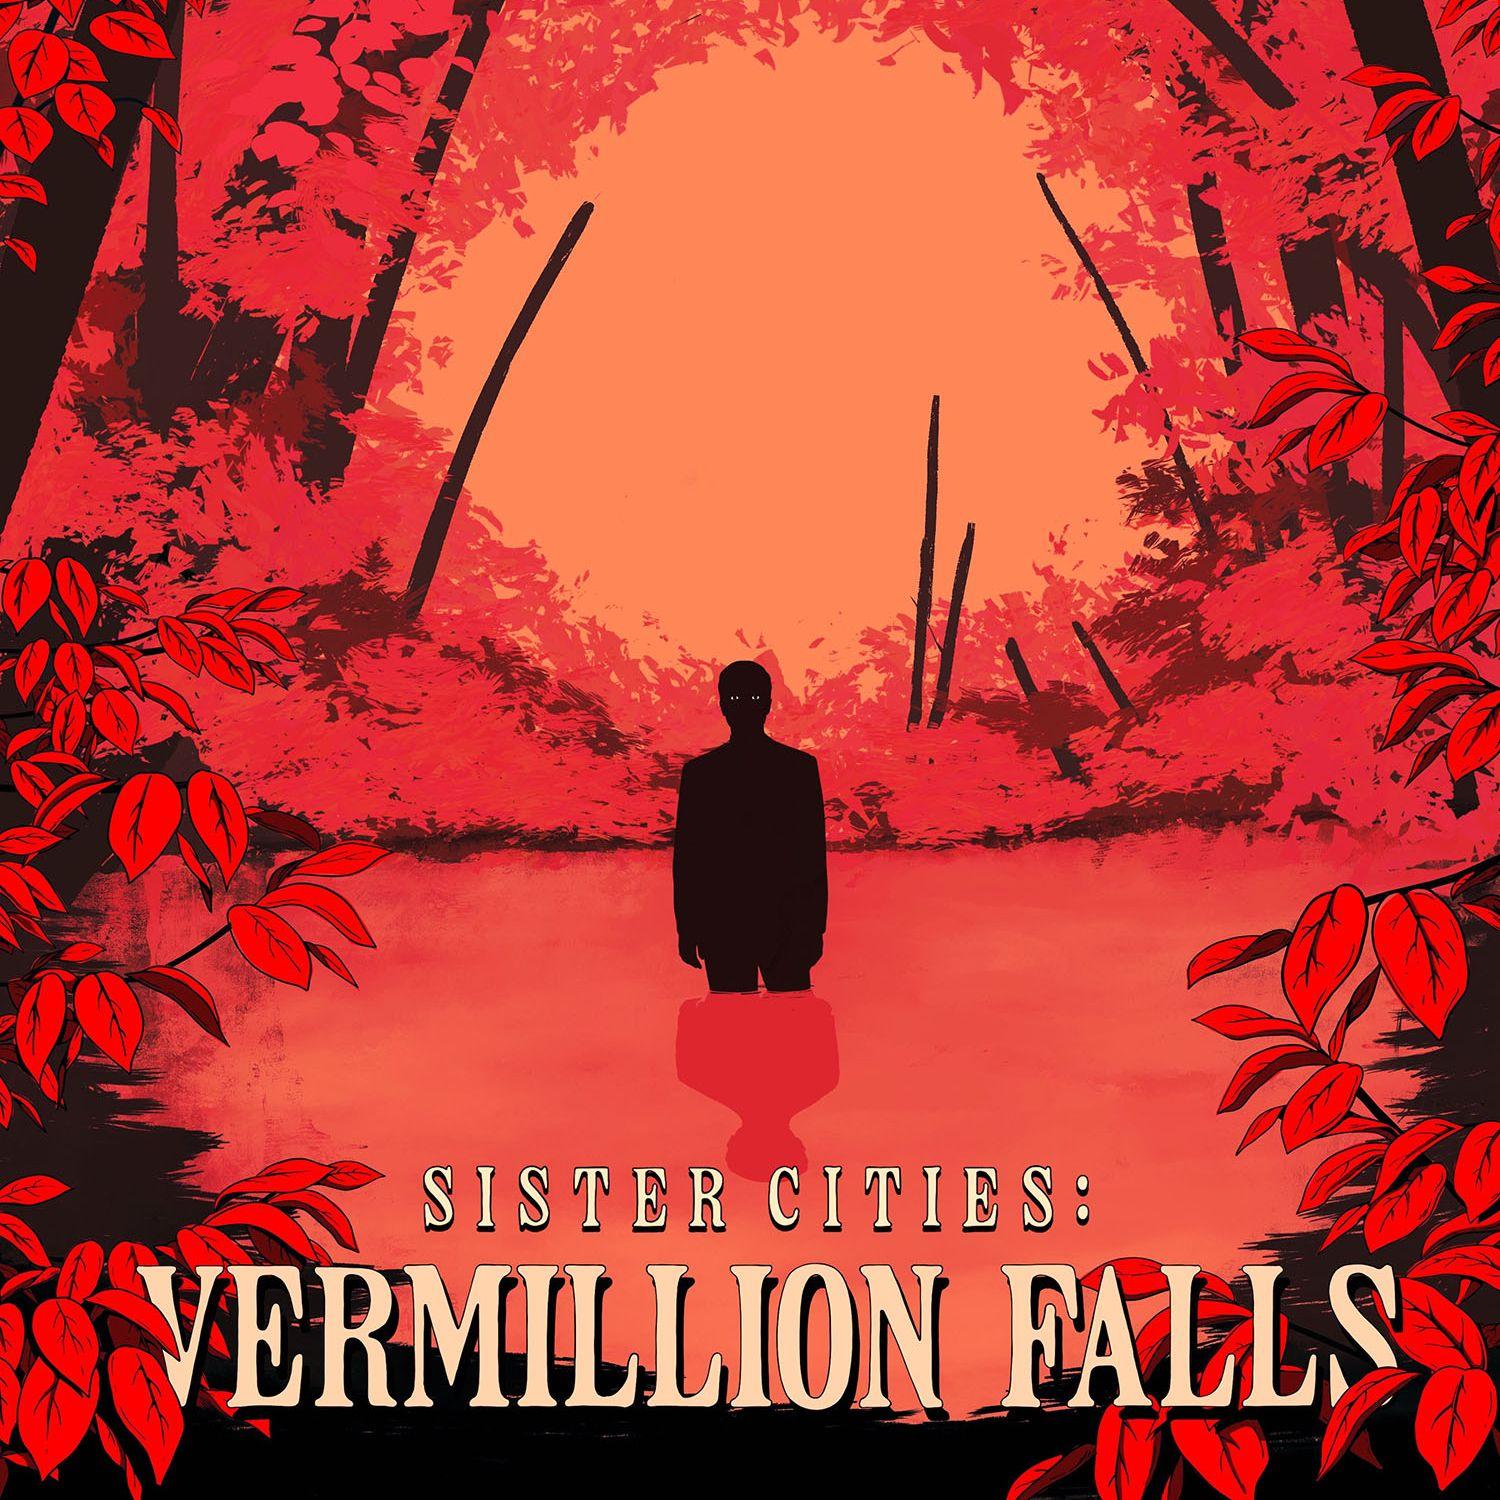 Thumbnail for "239 - Sister Cities: Vermillion Falls".